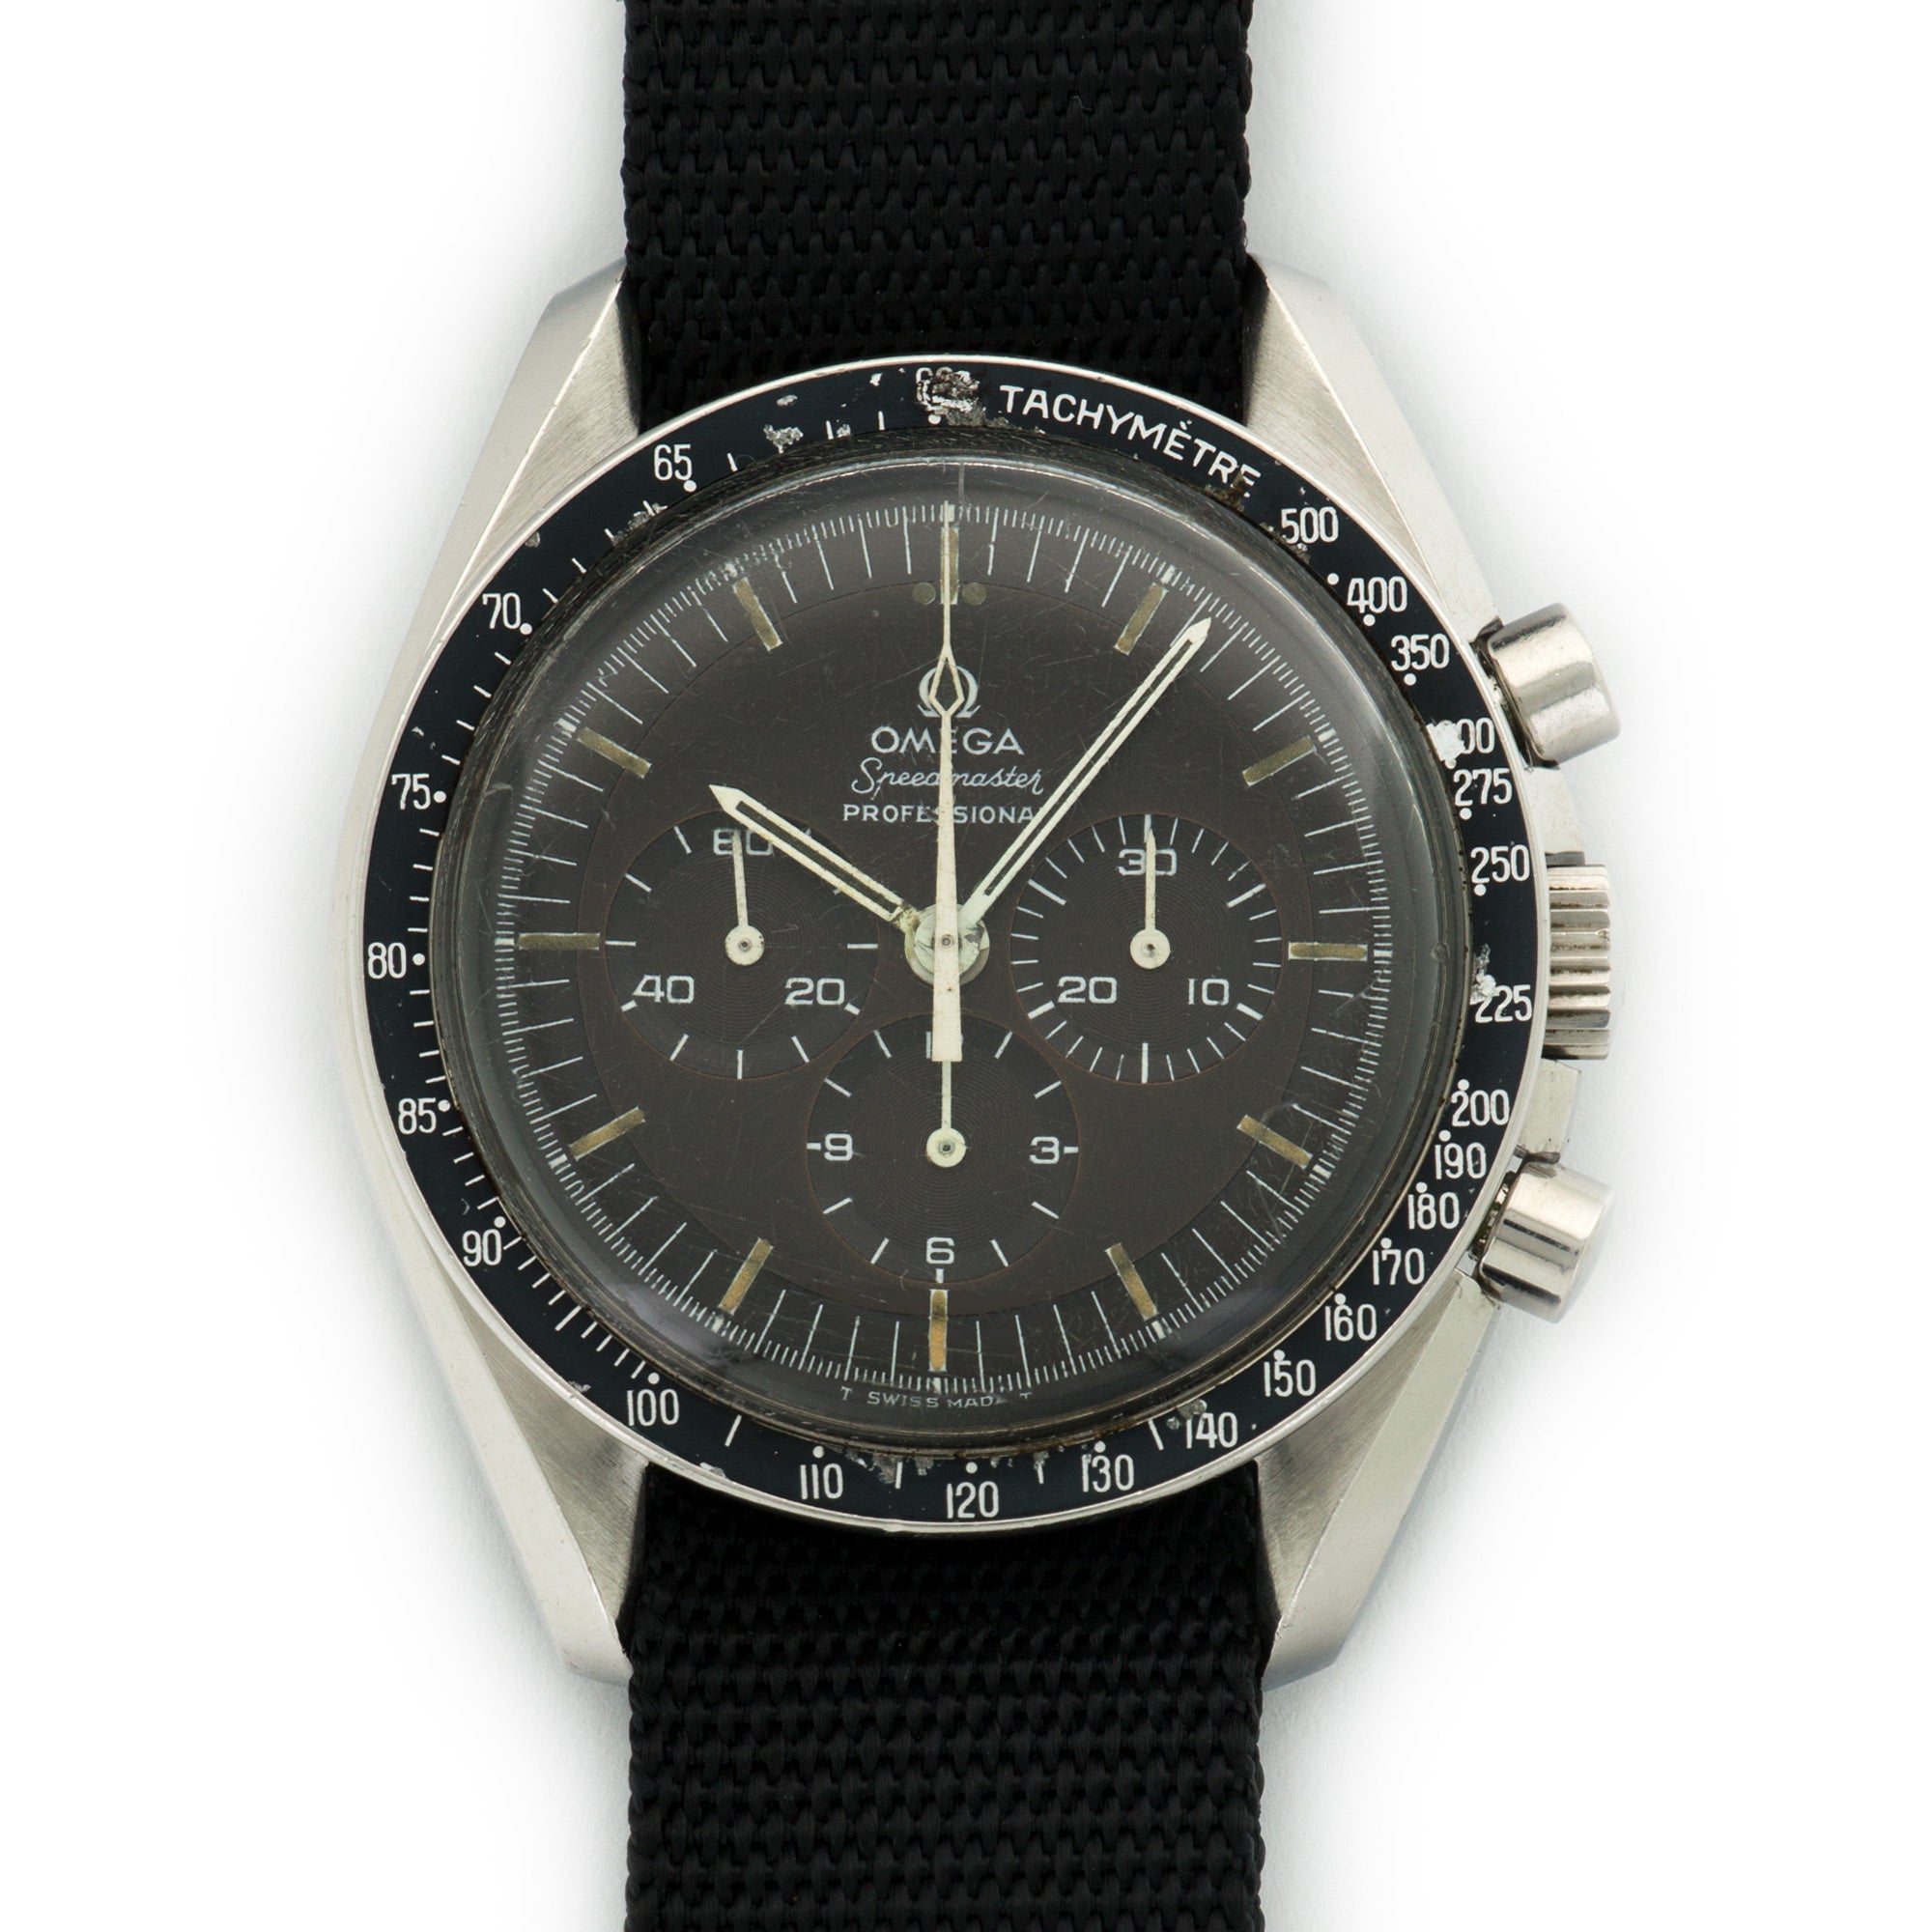 Omega - Omega Stainless Steel Speedmaster Watch Ref. 145.022 - The Keystone Watches